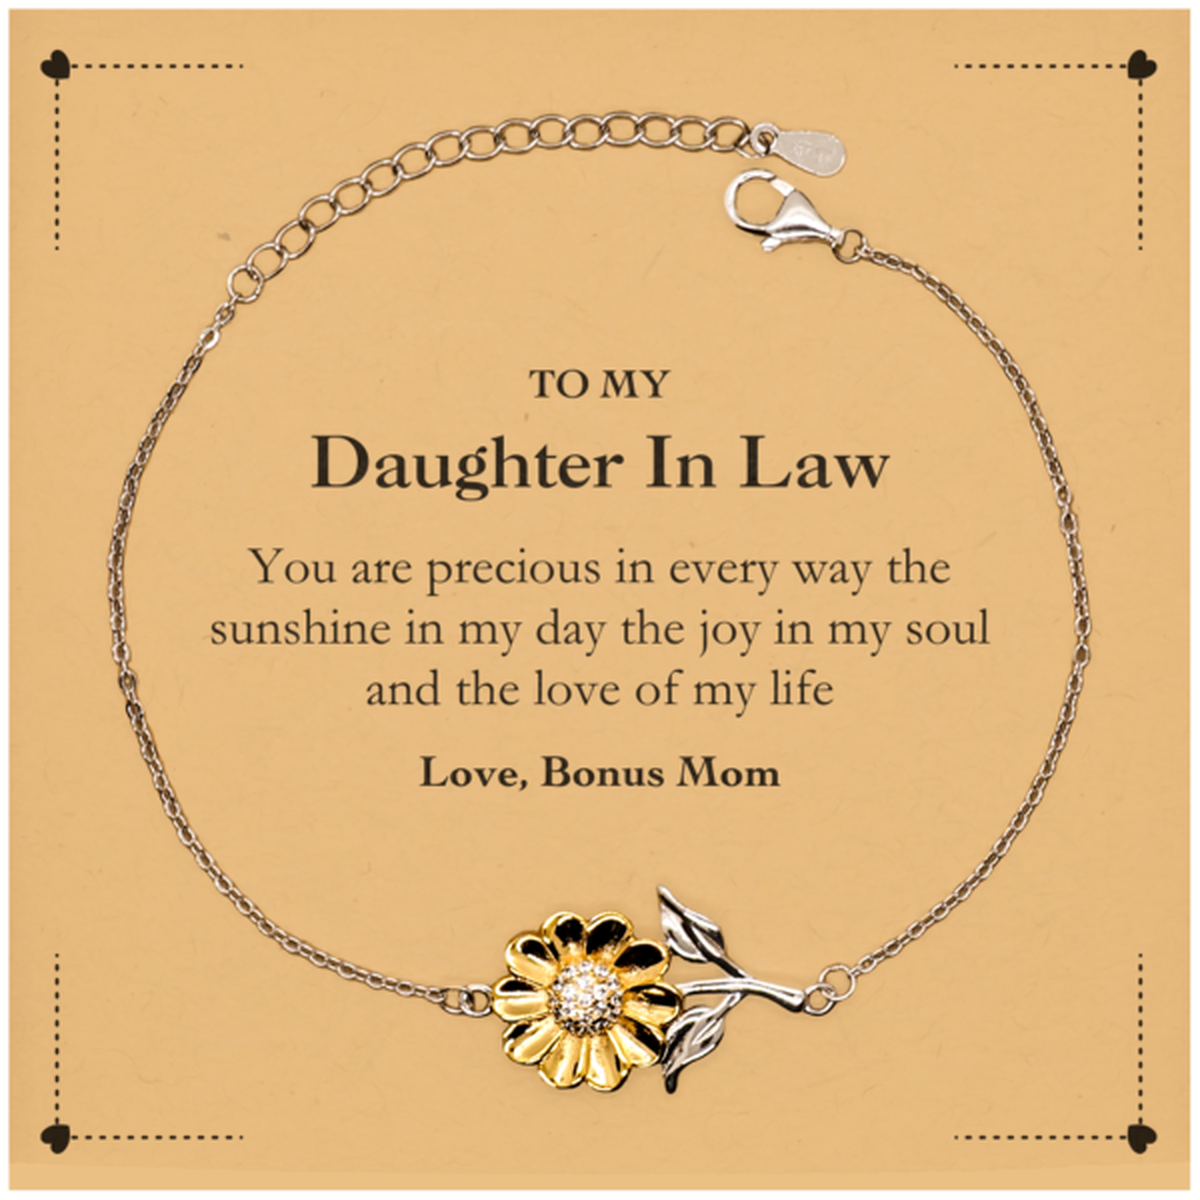 Graduation Gifts for Daughter In Law Sunflower Bracelet Present from Bonus Mom, Christmas Daughter In Law Birthday Gifts Daughter In Law You are precious in every way the sunshine in my day. Love, Bonus Mom